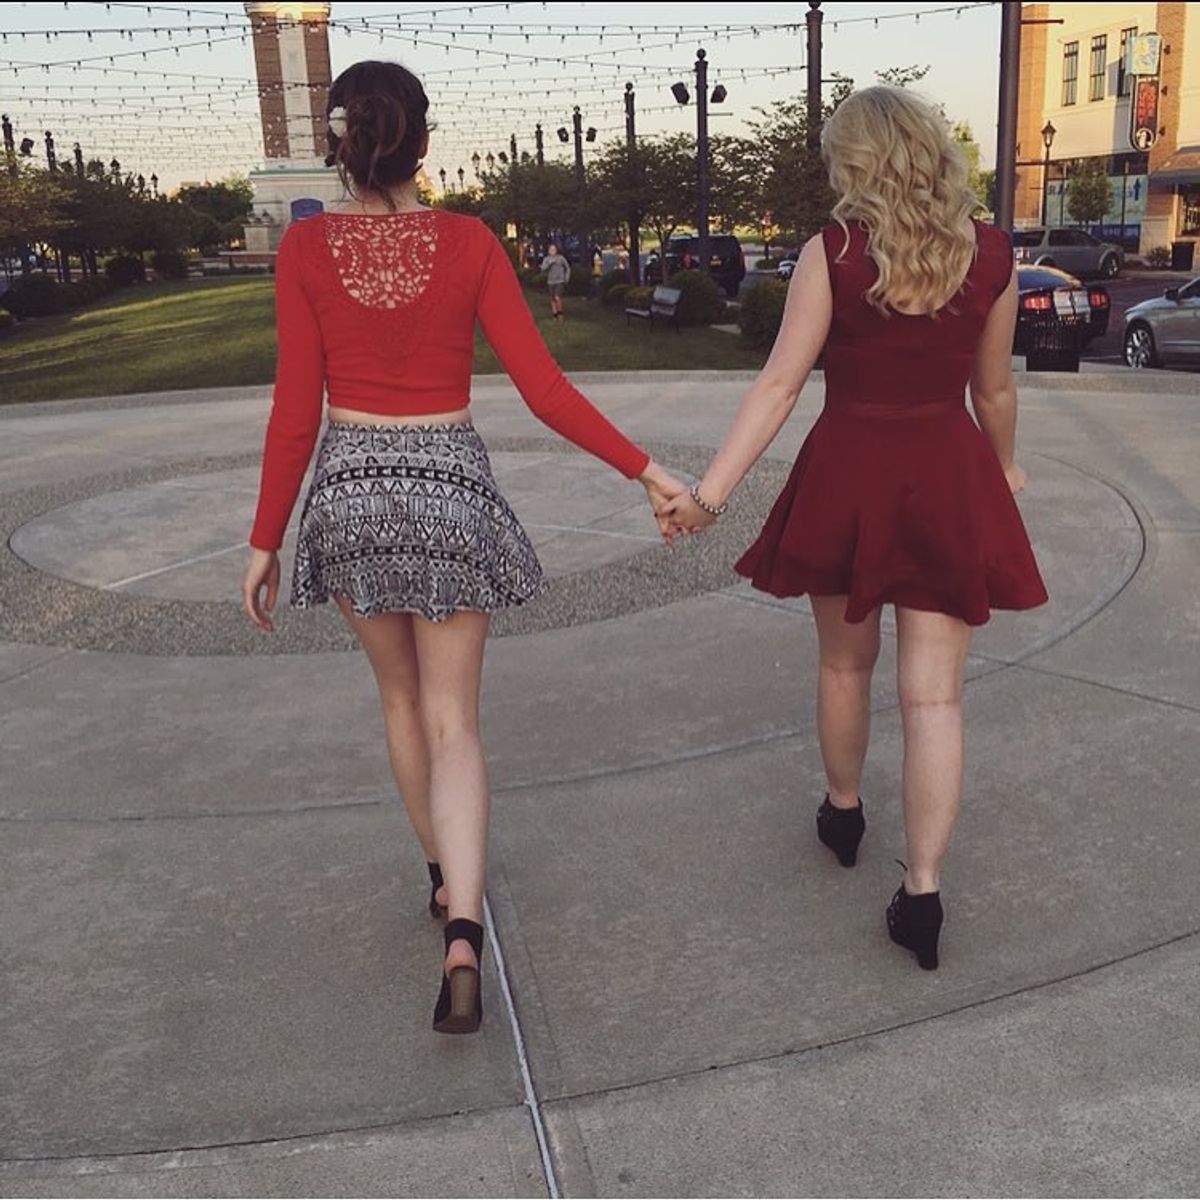 An Open Letter To my Best Friend On Her 19th Birthday